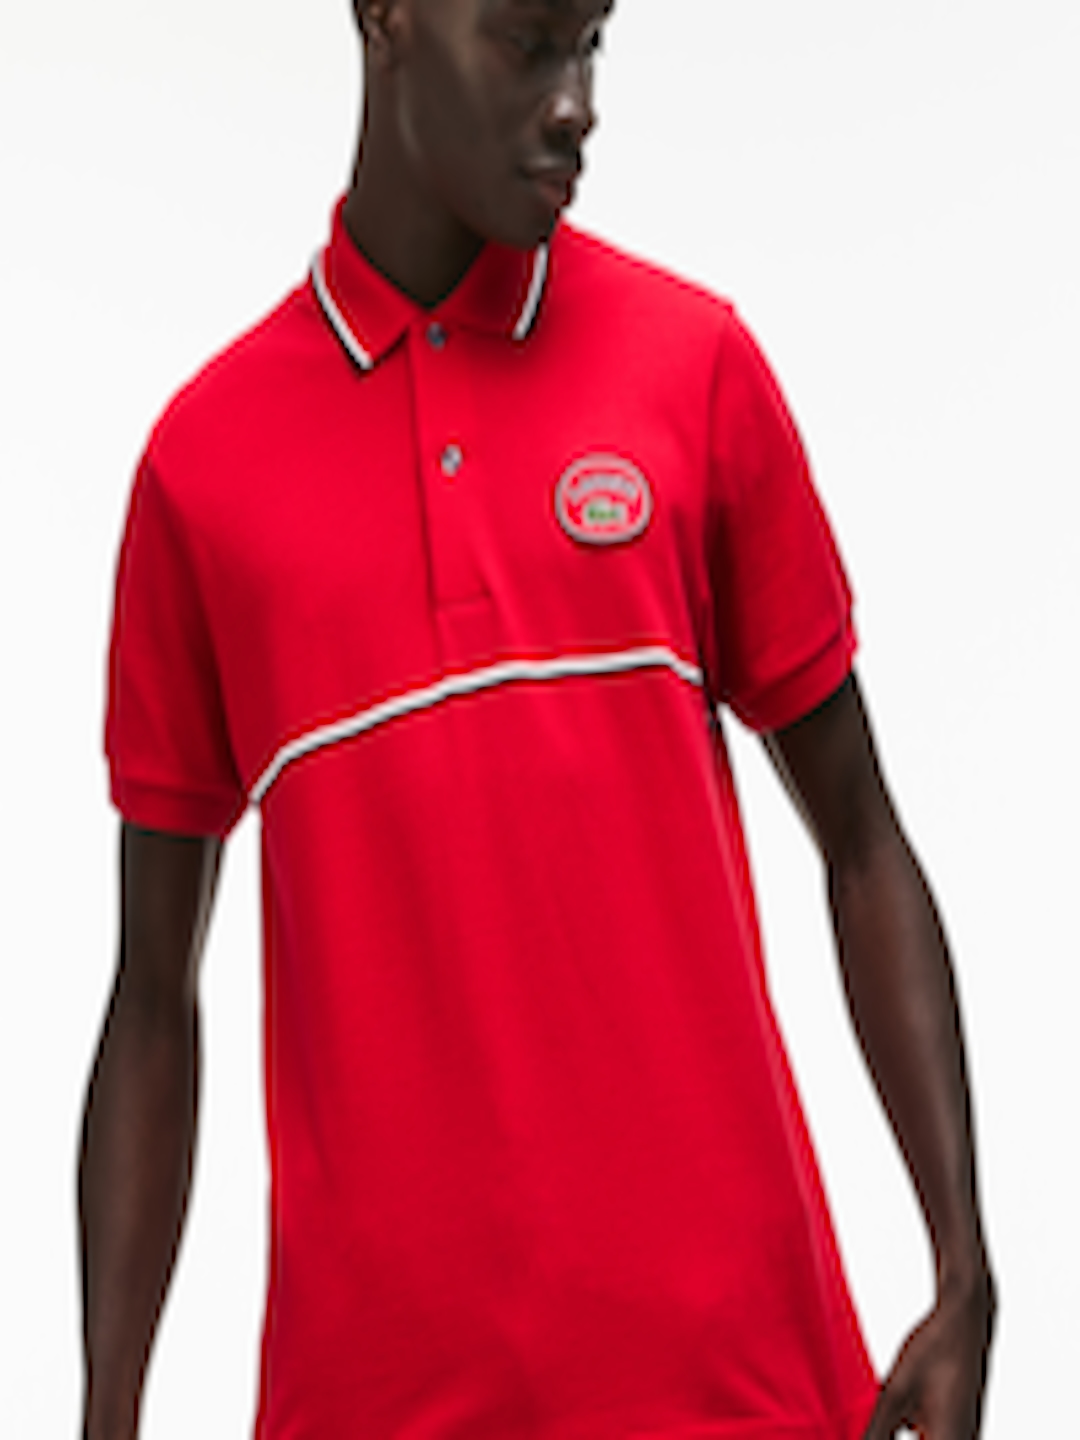 Buy Lacoste Men Red Slim Fit Striped Accents Petit Pique Polo - Tshirts